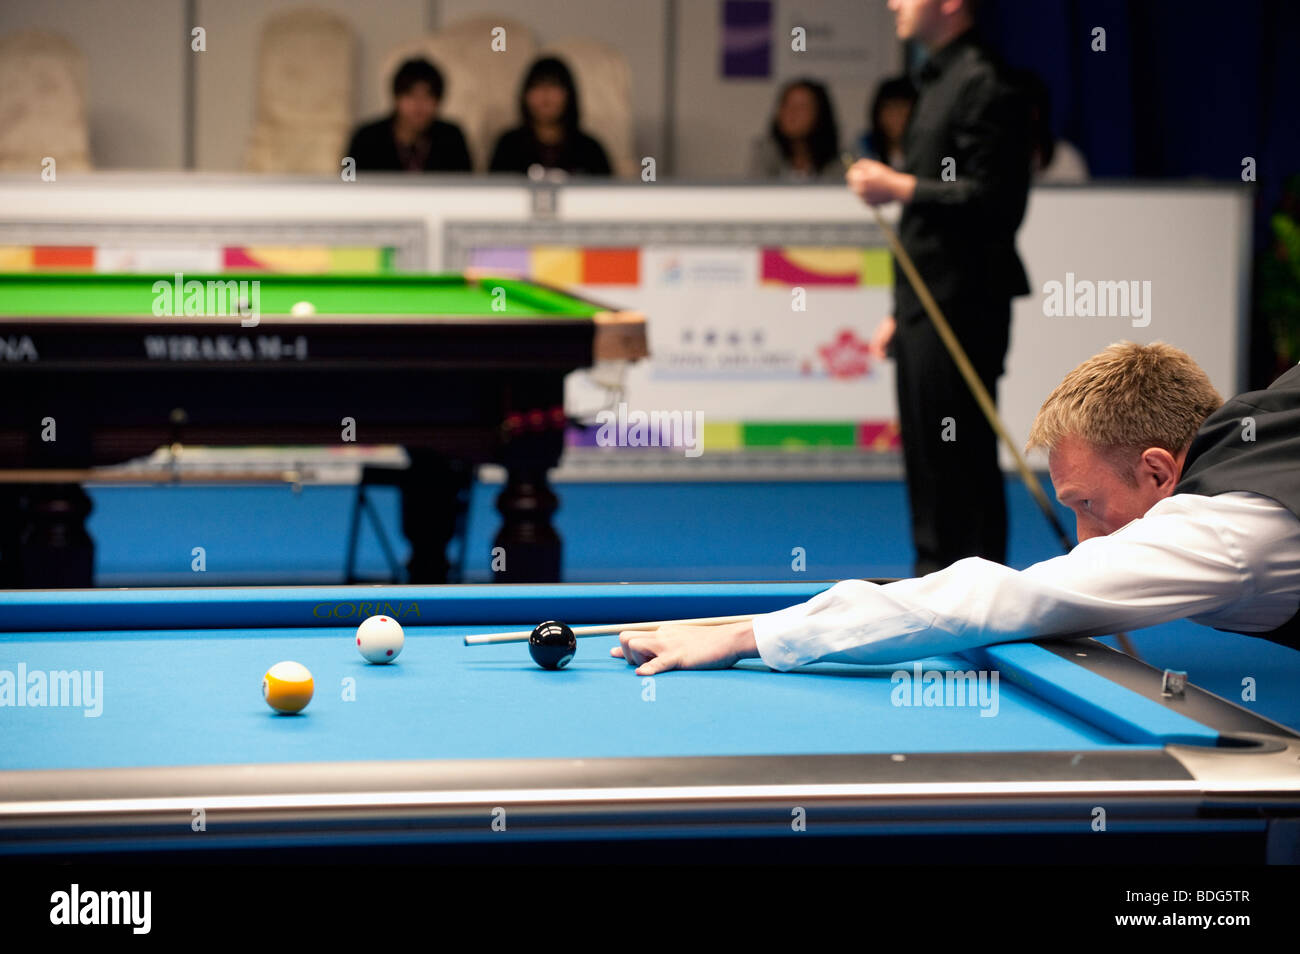 Thorsten Hohmann of Germany competes in Billiards 9 Ball competition, World Games, Kaohsiung, Taiwan, July 23, 2009 Stock Photo